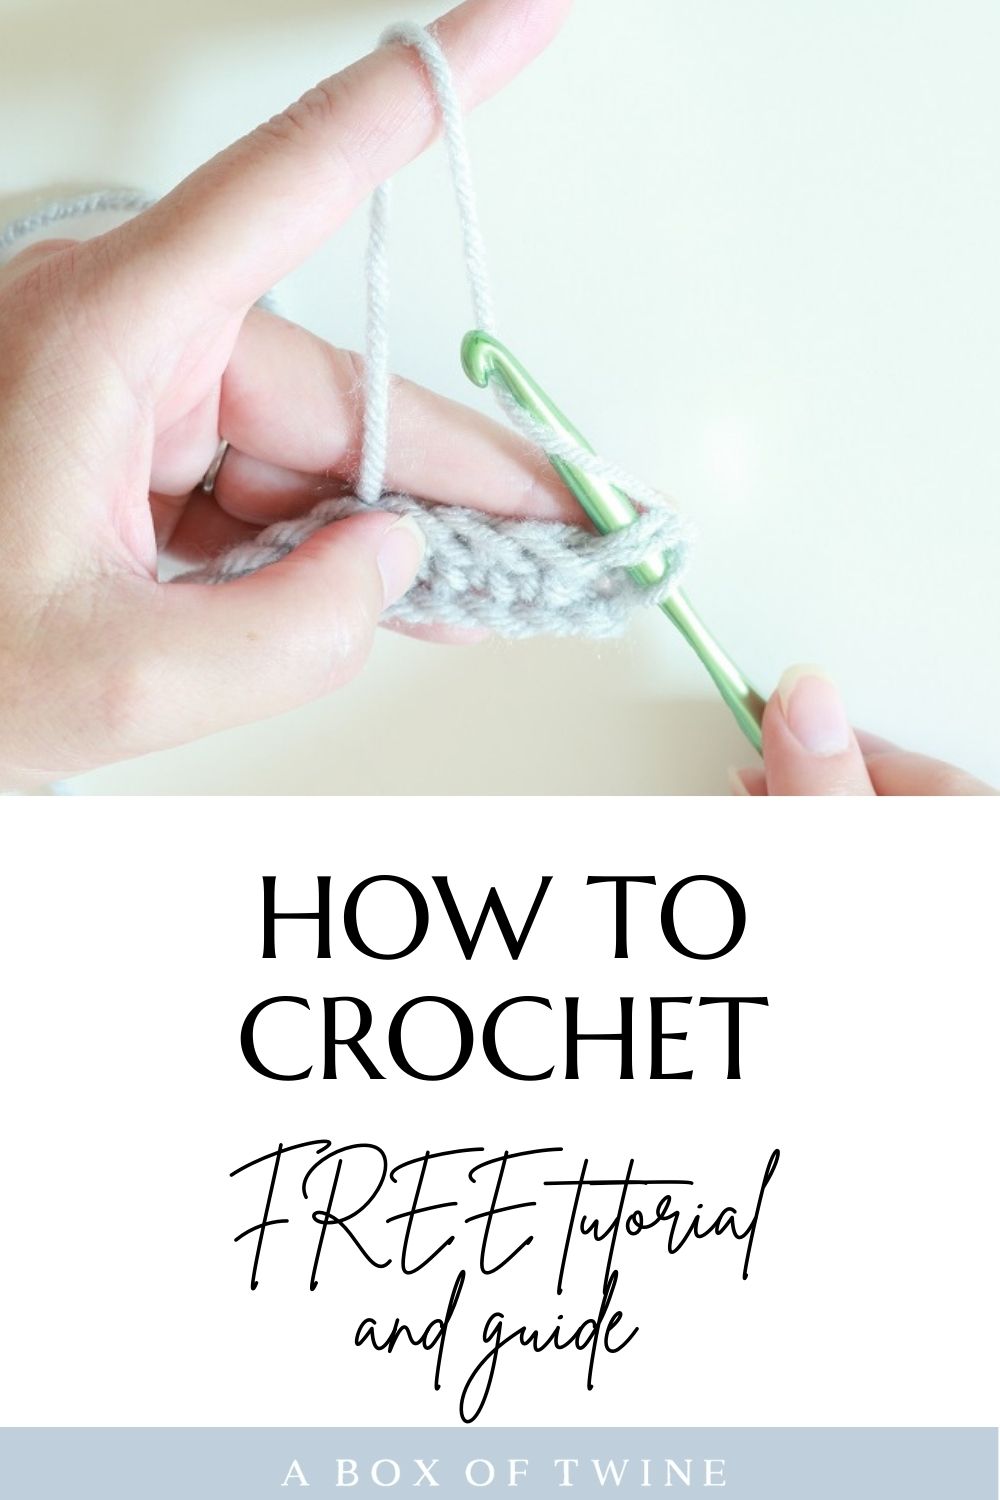 5 Must-Have Crocheting Stitch Books for Beginners